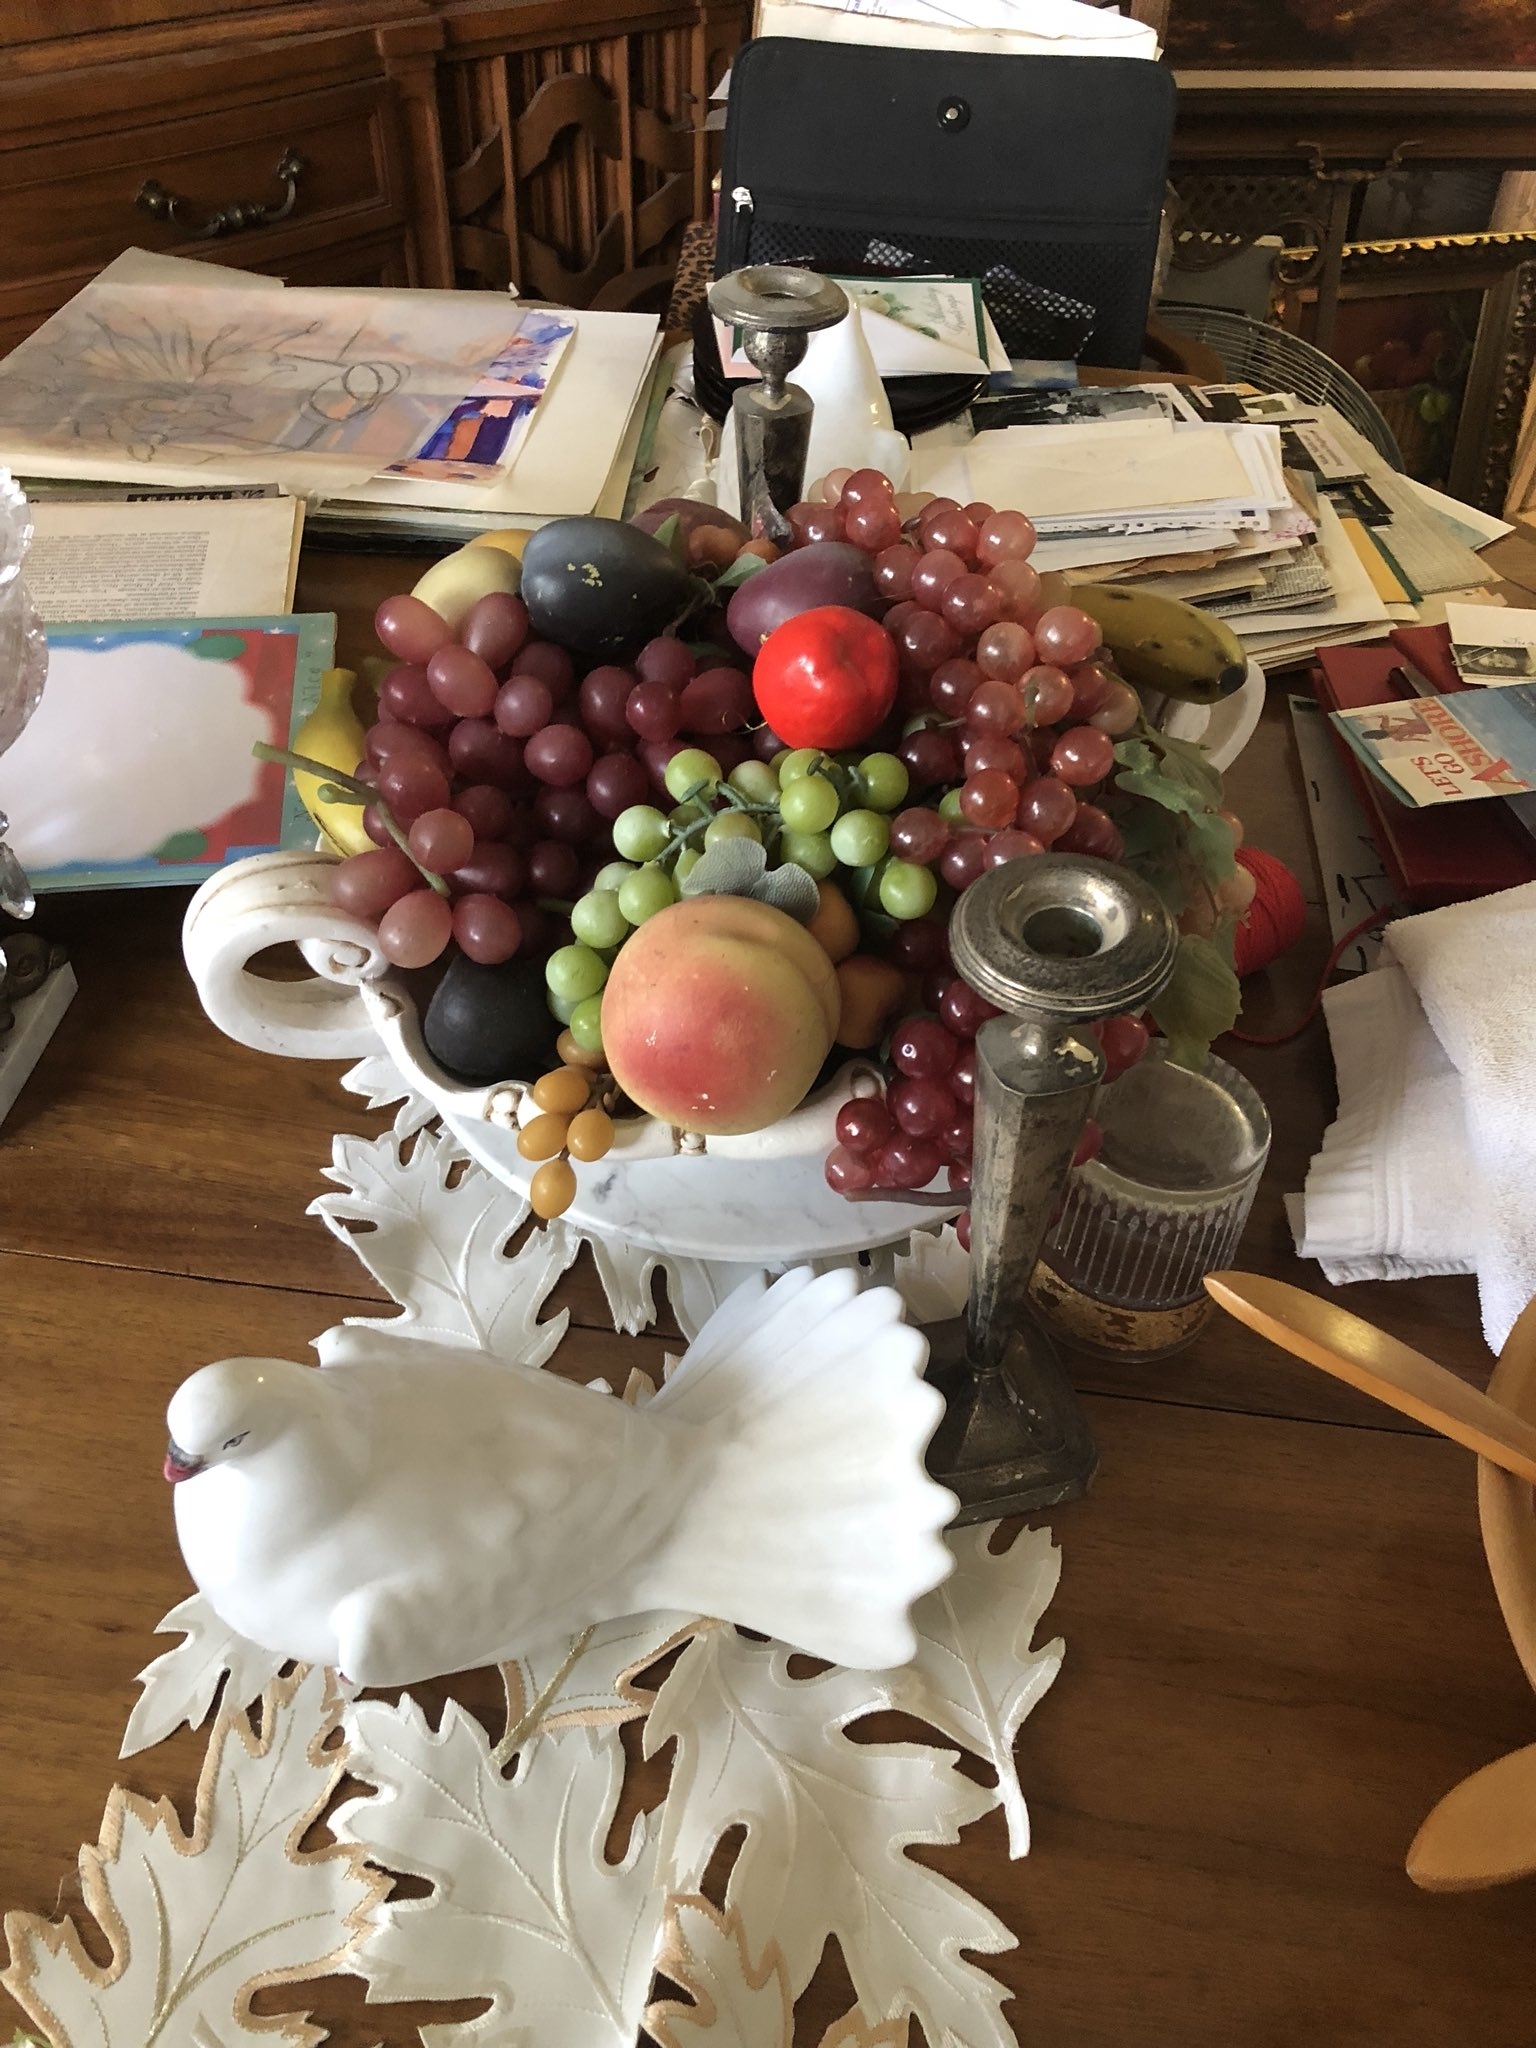 Fake fruit, including bunches of grapes, on display on a table